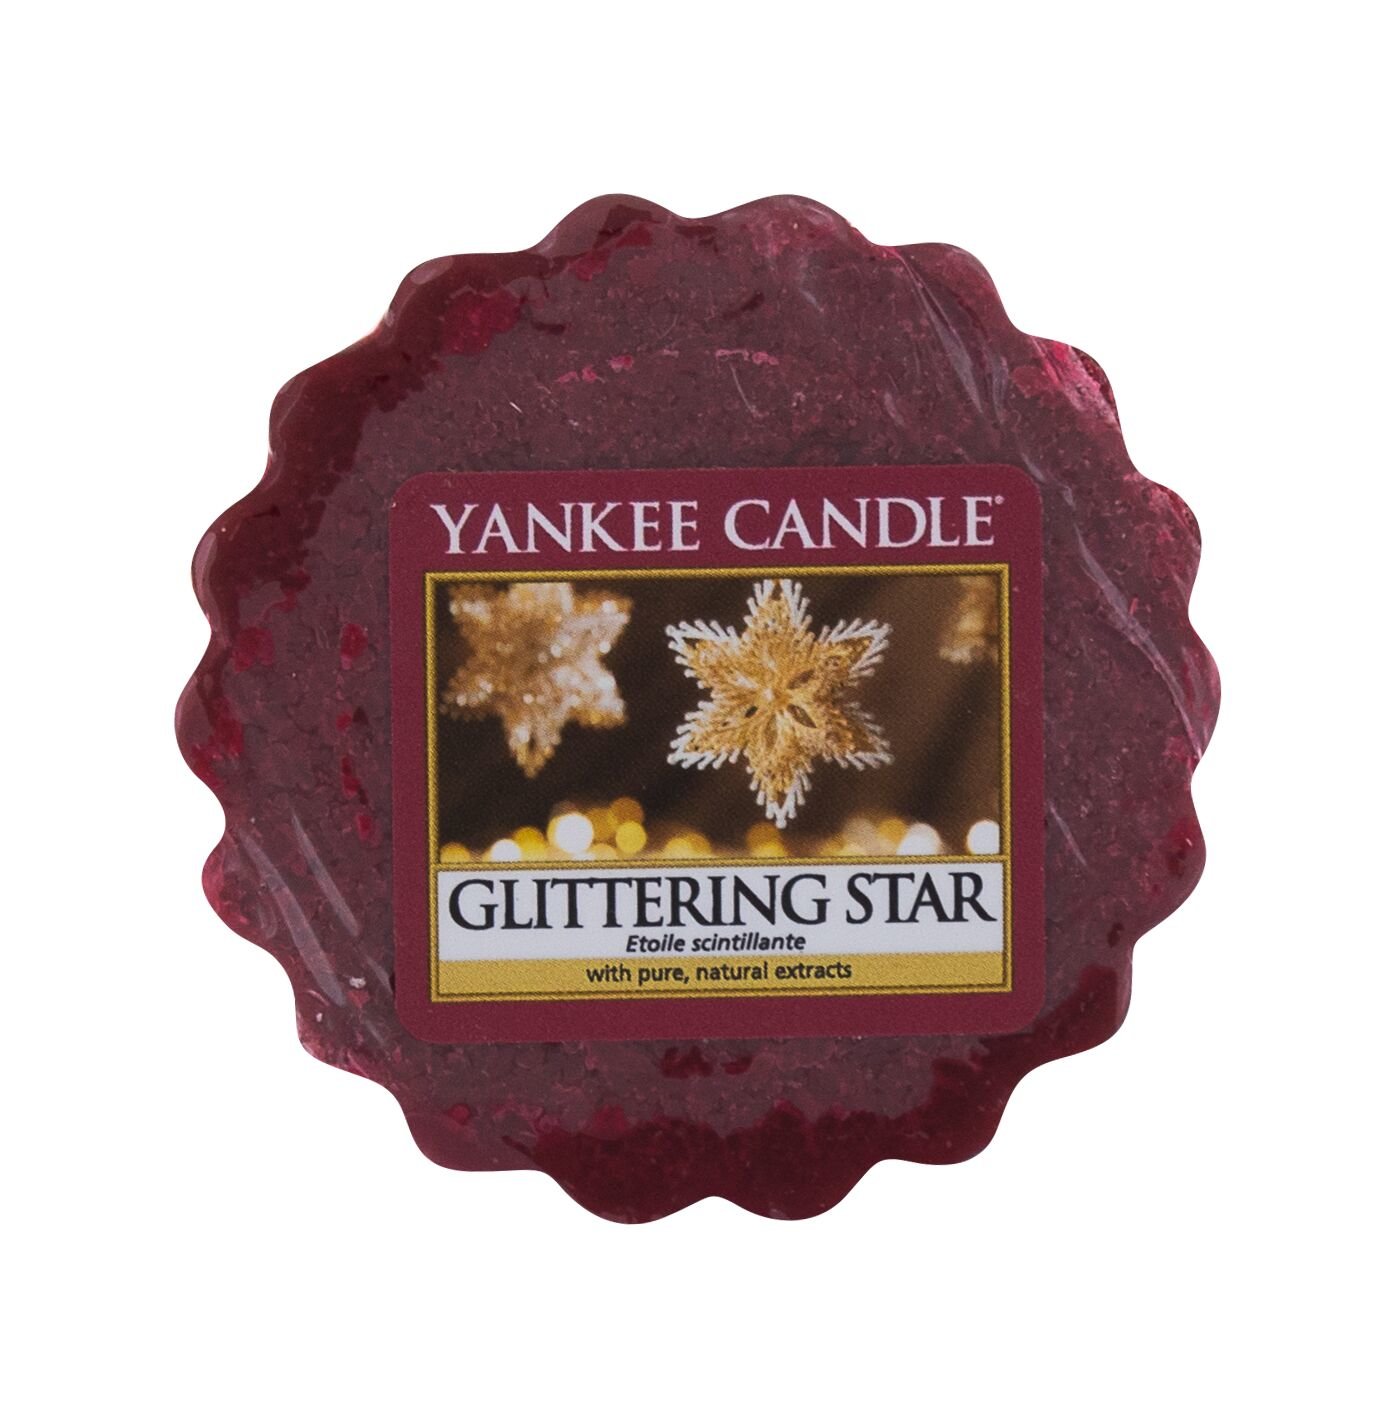 Yankee Candle Glittering Star 22g Kvepalai Unisex Scented Candle